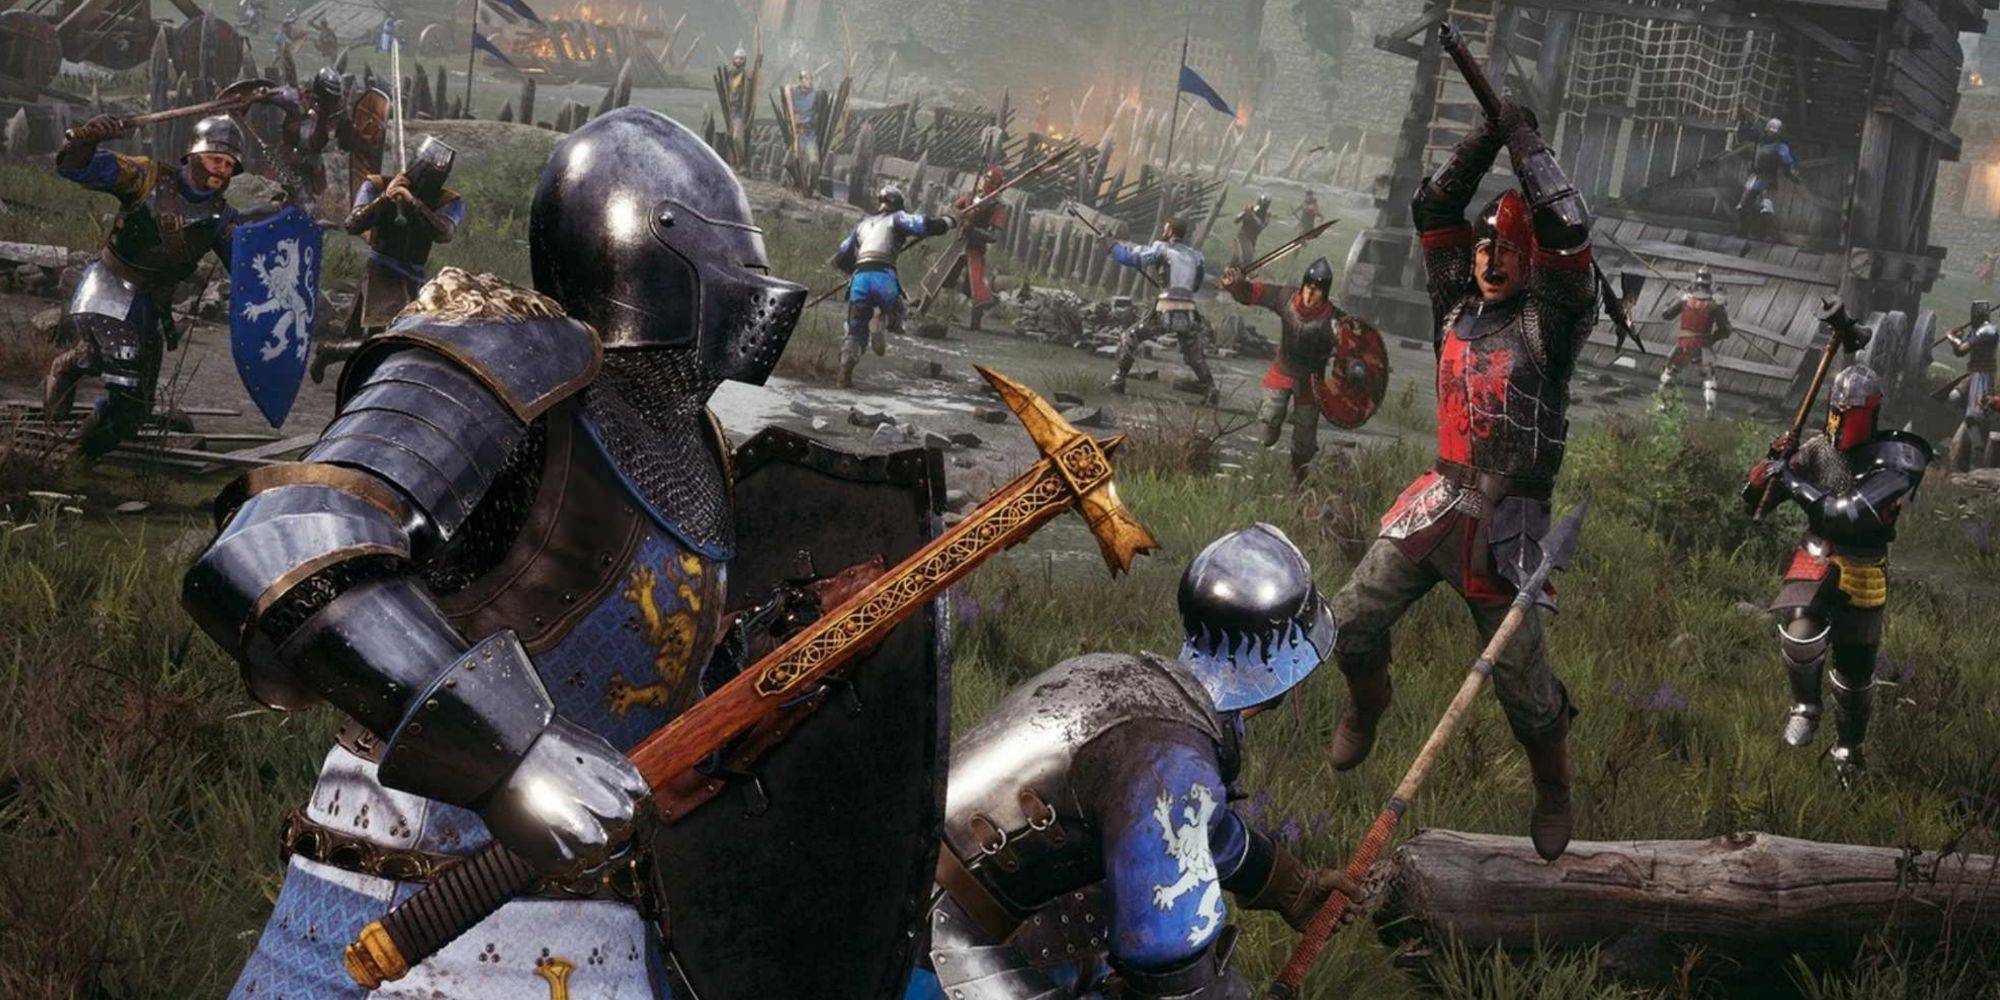 Agatha Knights facing the Mason Order on the battlefield in Chivalry 2